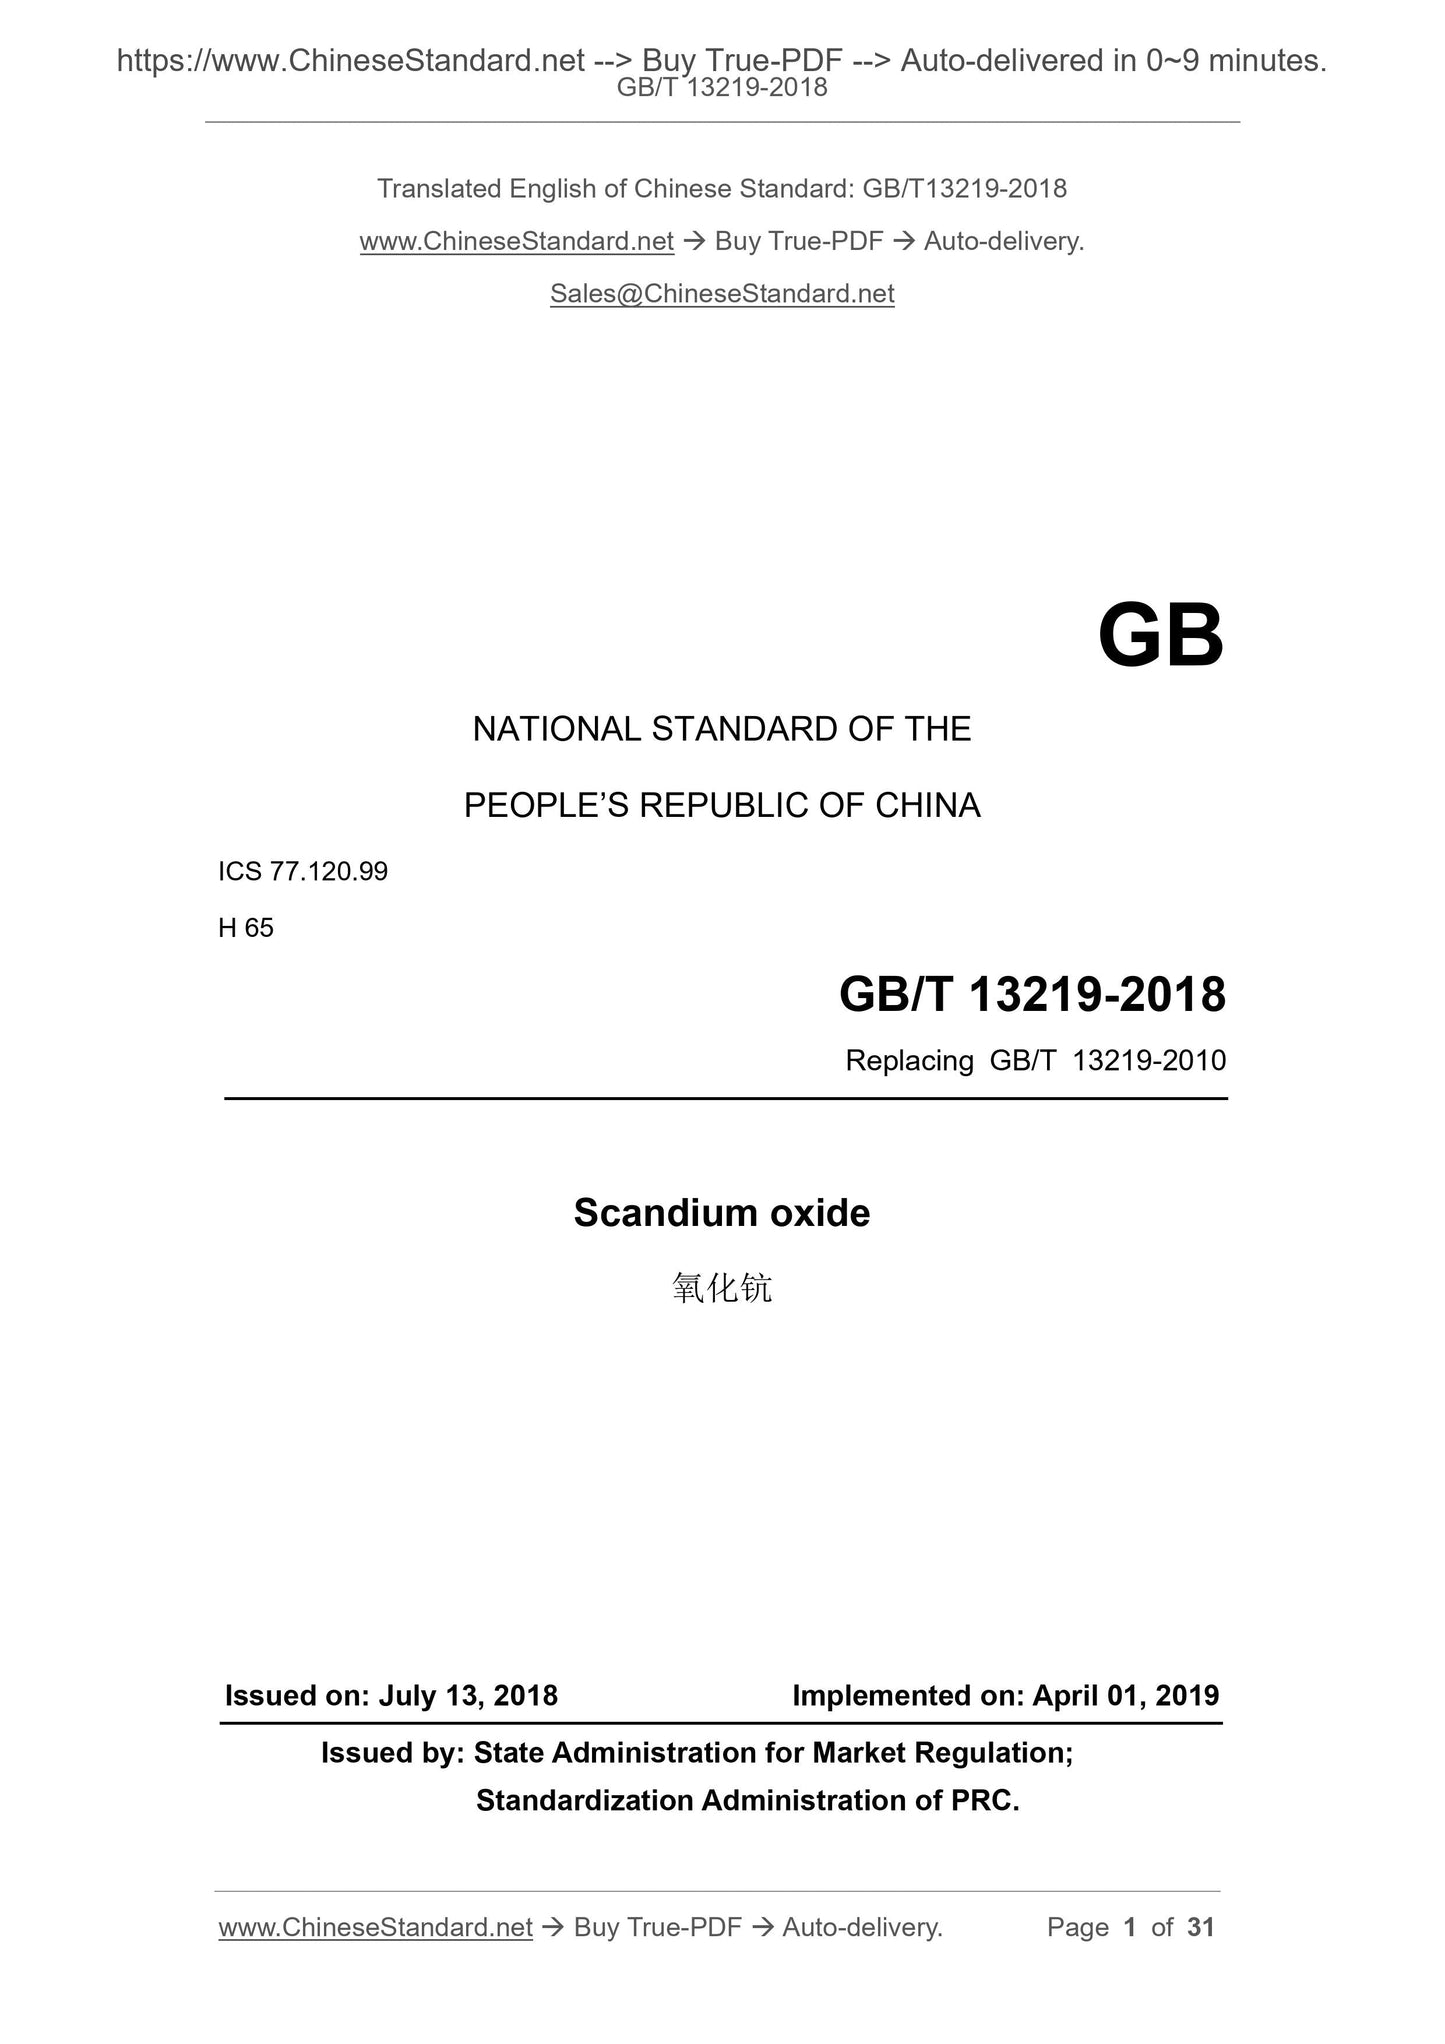 GB/T 13219-2018 Page 1